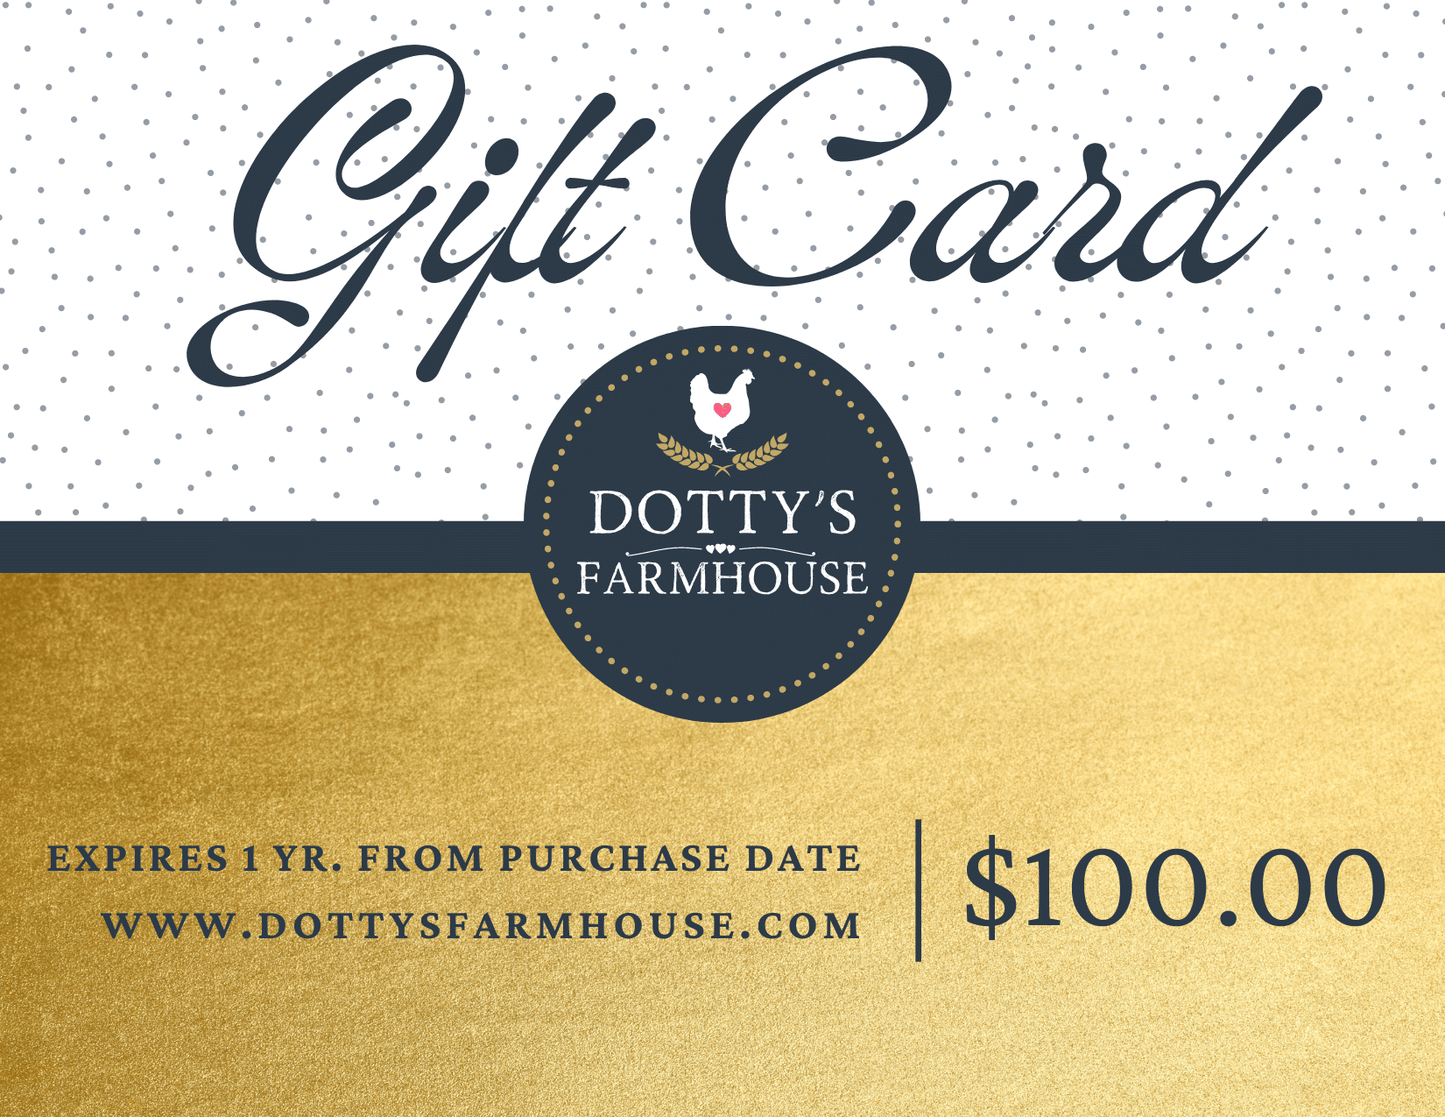 Gift Cards $100.00 / Email Gift Card Dotty's Farmhouse Gift Card